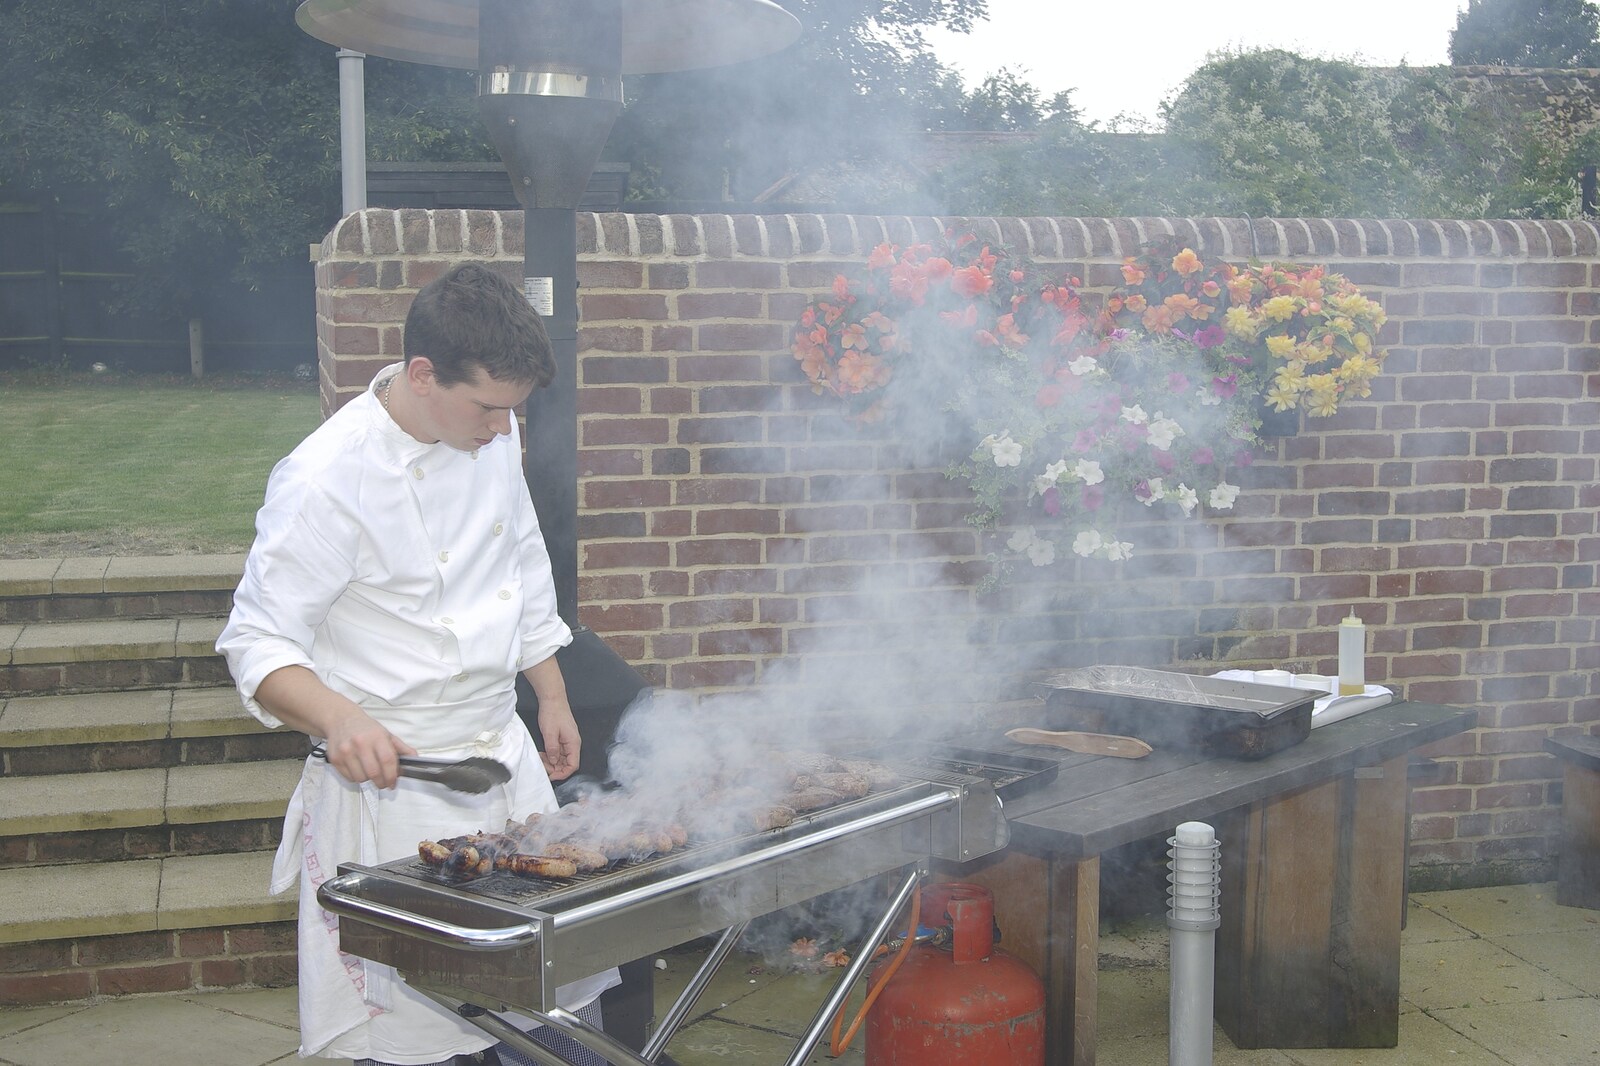 Liviu and Christina's Wedding Day, Babraham, Cambridge - 11th August 2007: The barbeque is smopking away